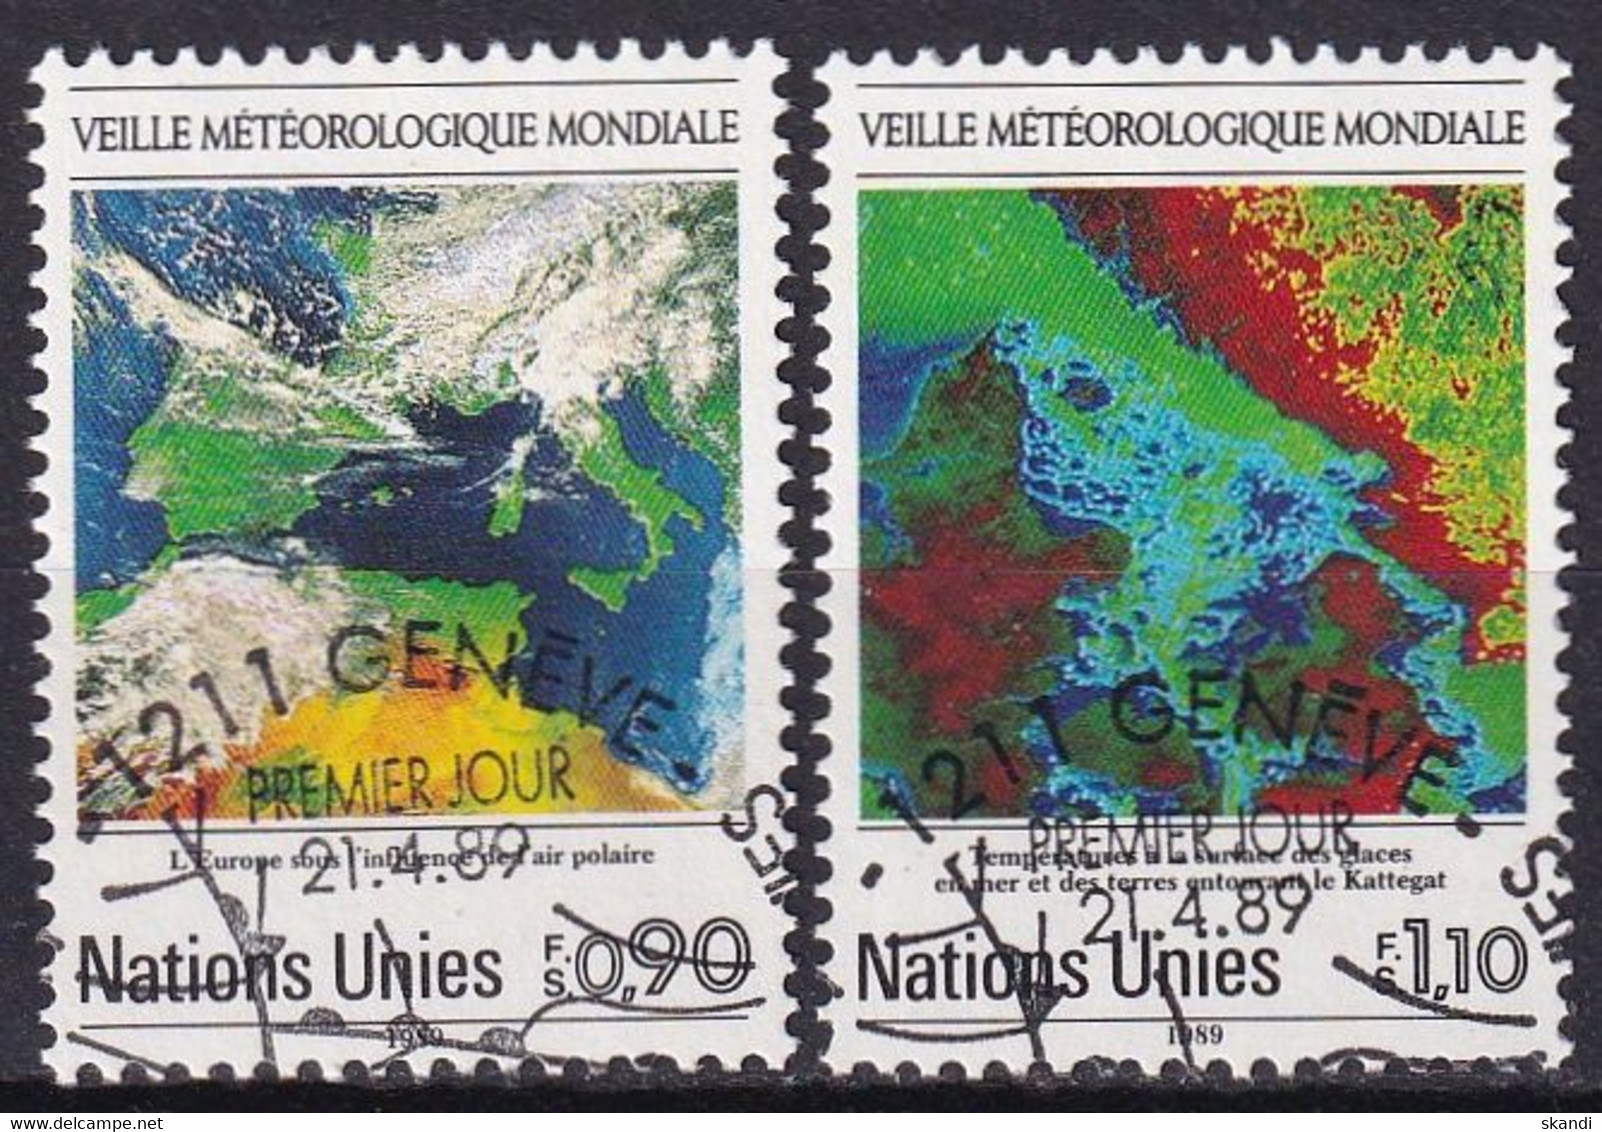 UNO GENF 1989 Mi-Nr. 176/77 O Used - Aus Abo - Used Stamps